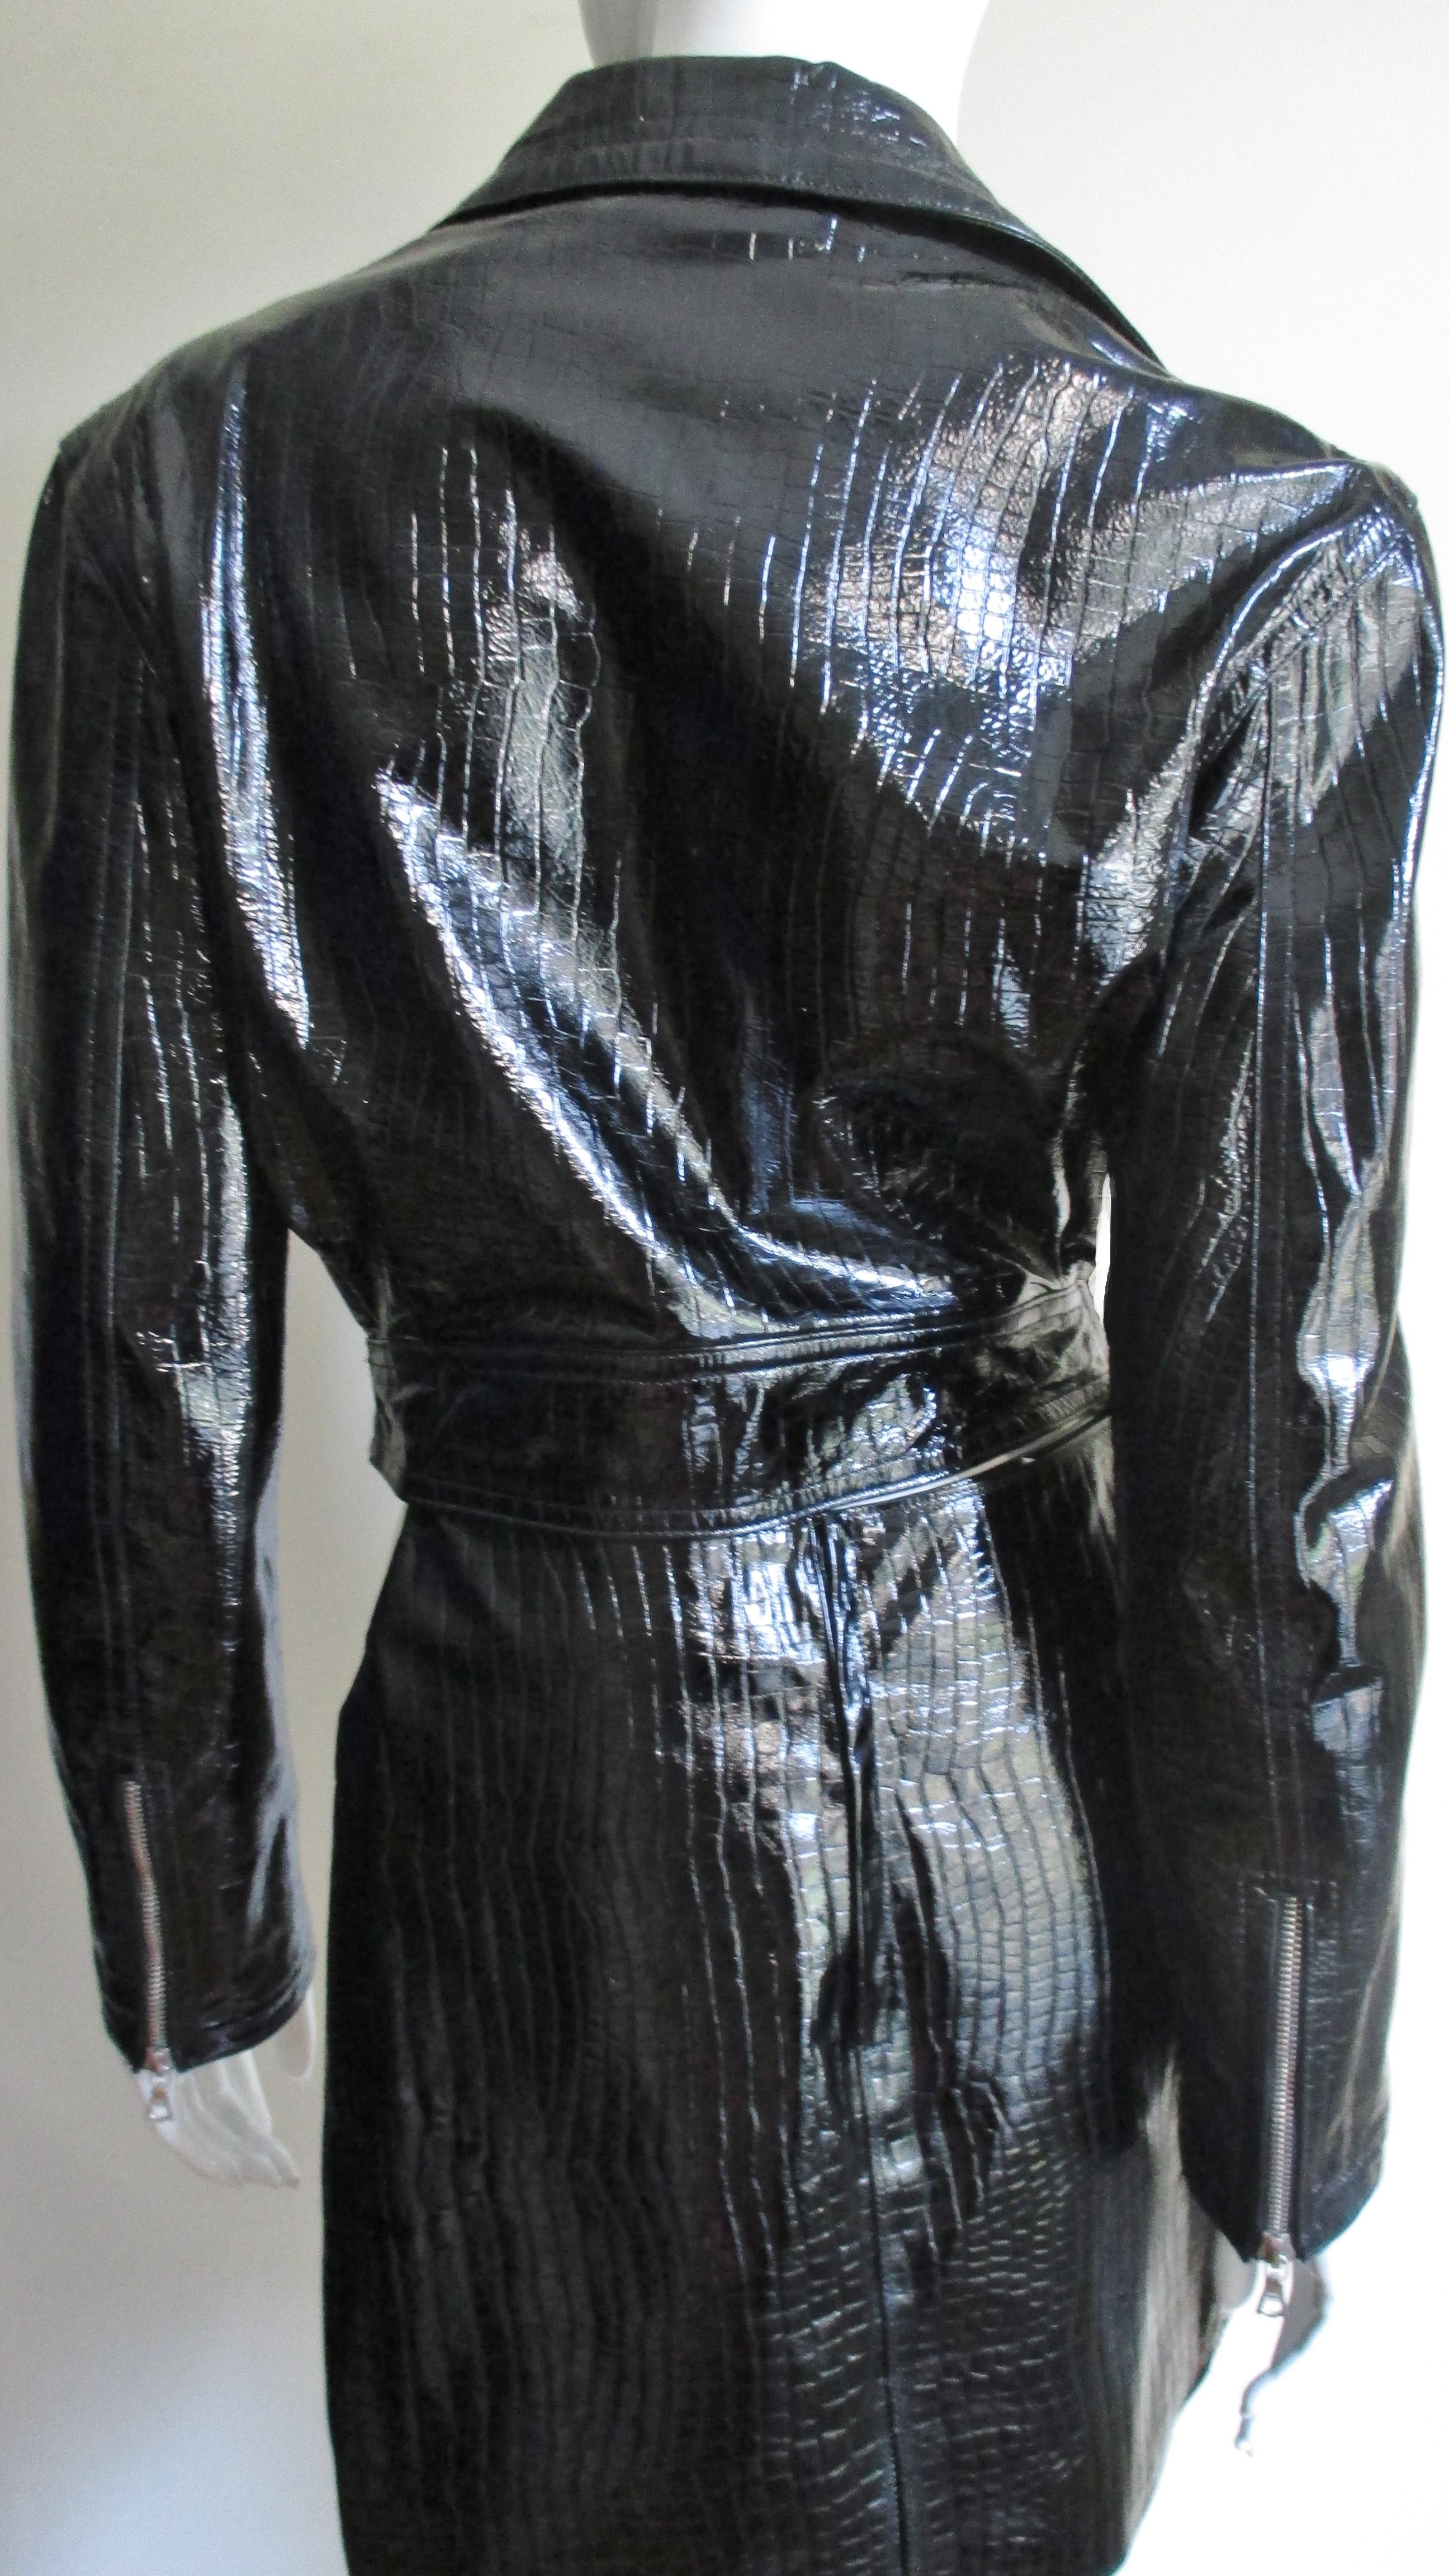 Gianni Versace Leather Motorcycle Jacket and Skirt A/W 1994 For Sale 3